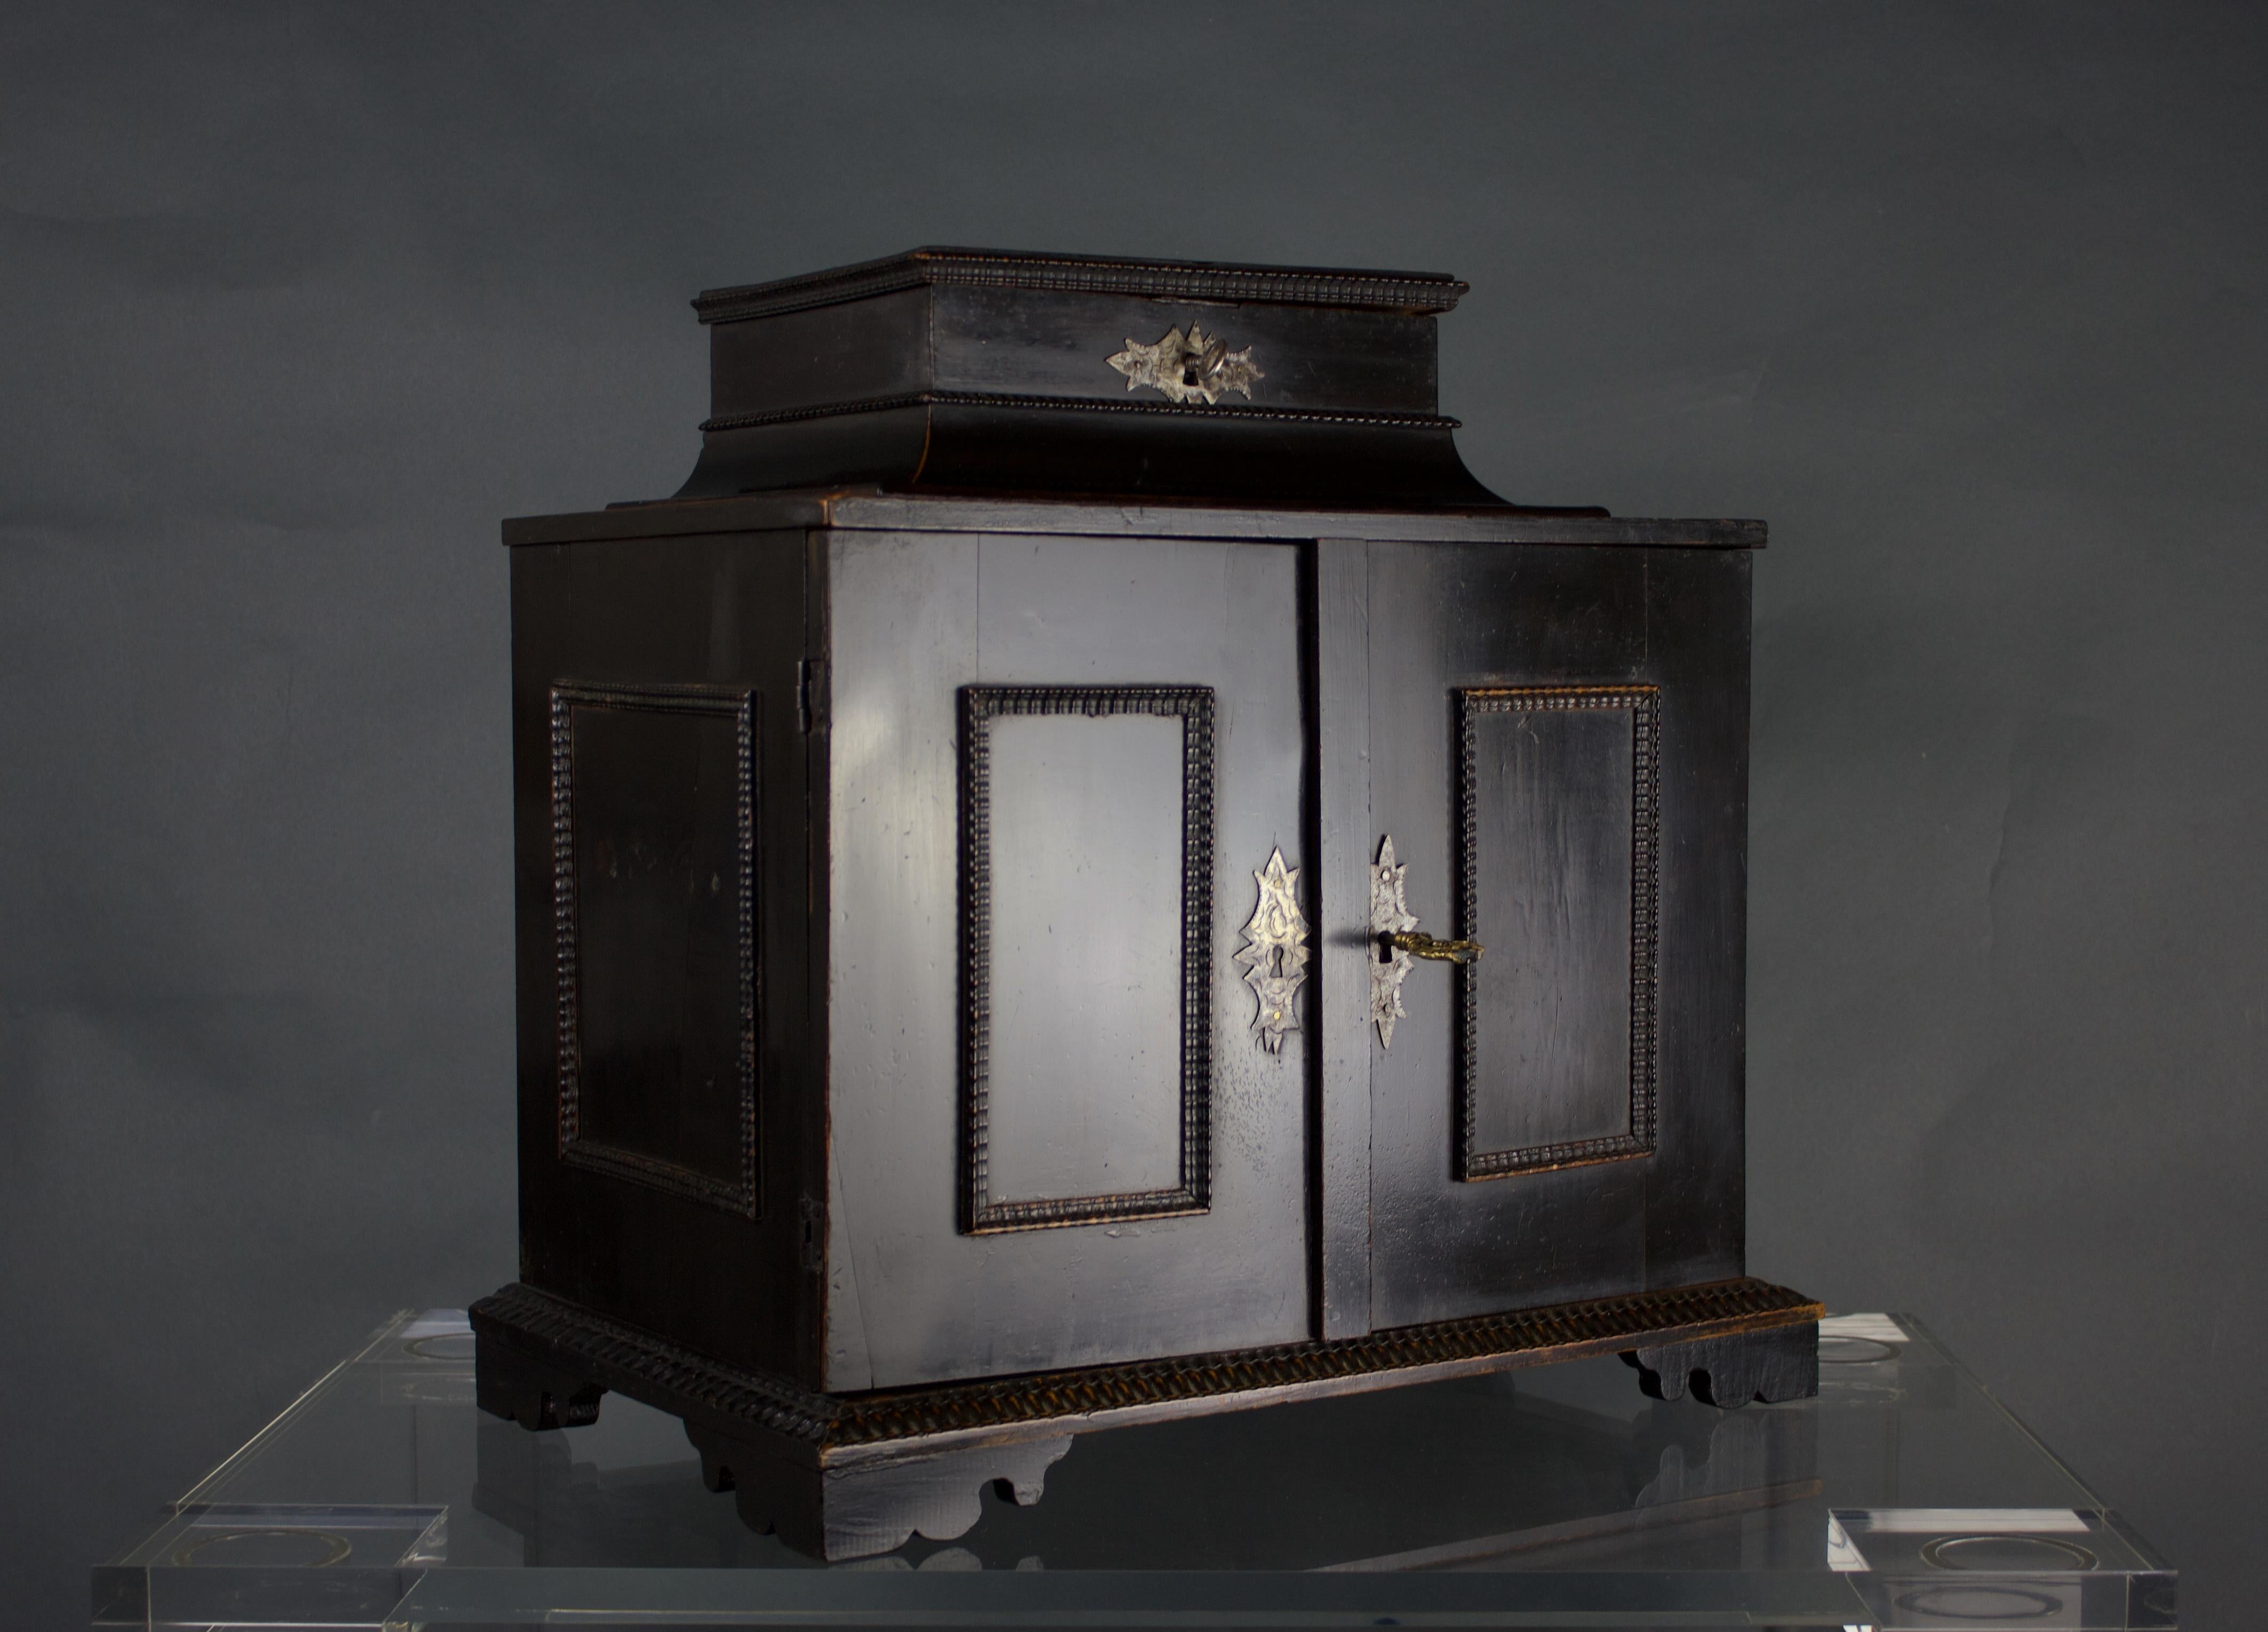 A fine 17th Century Flemish Ebonised Pearwood Table Cabinet, Circa 1650. This cabinet is a testament to the ingenuity and artistry of Flemish craftsmen from the 17th century. The ebonised pearwood exterior boasts a dark, luxurious sheen, while